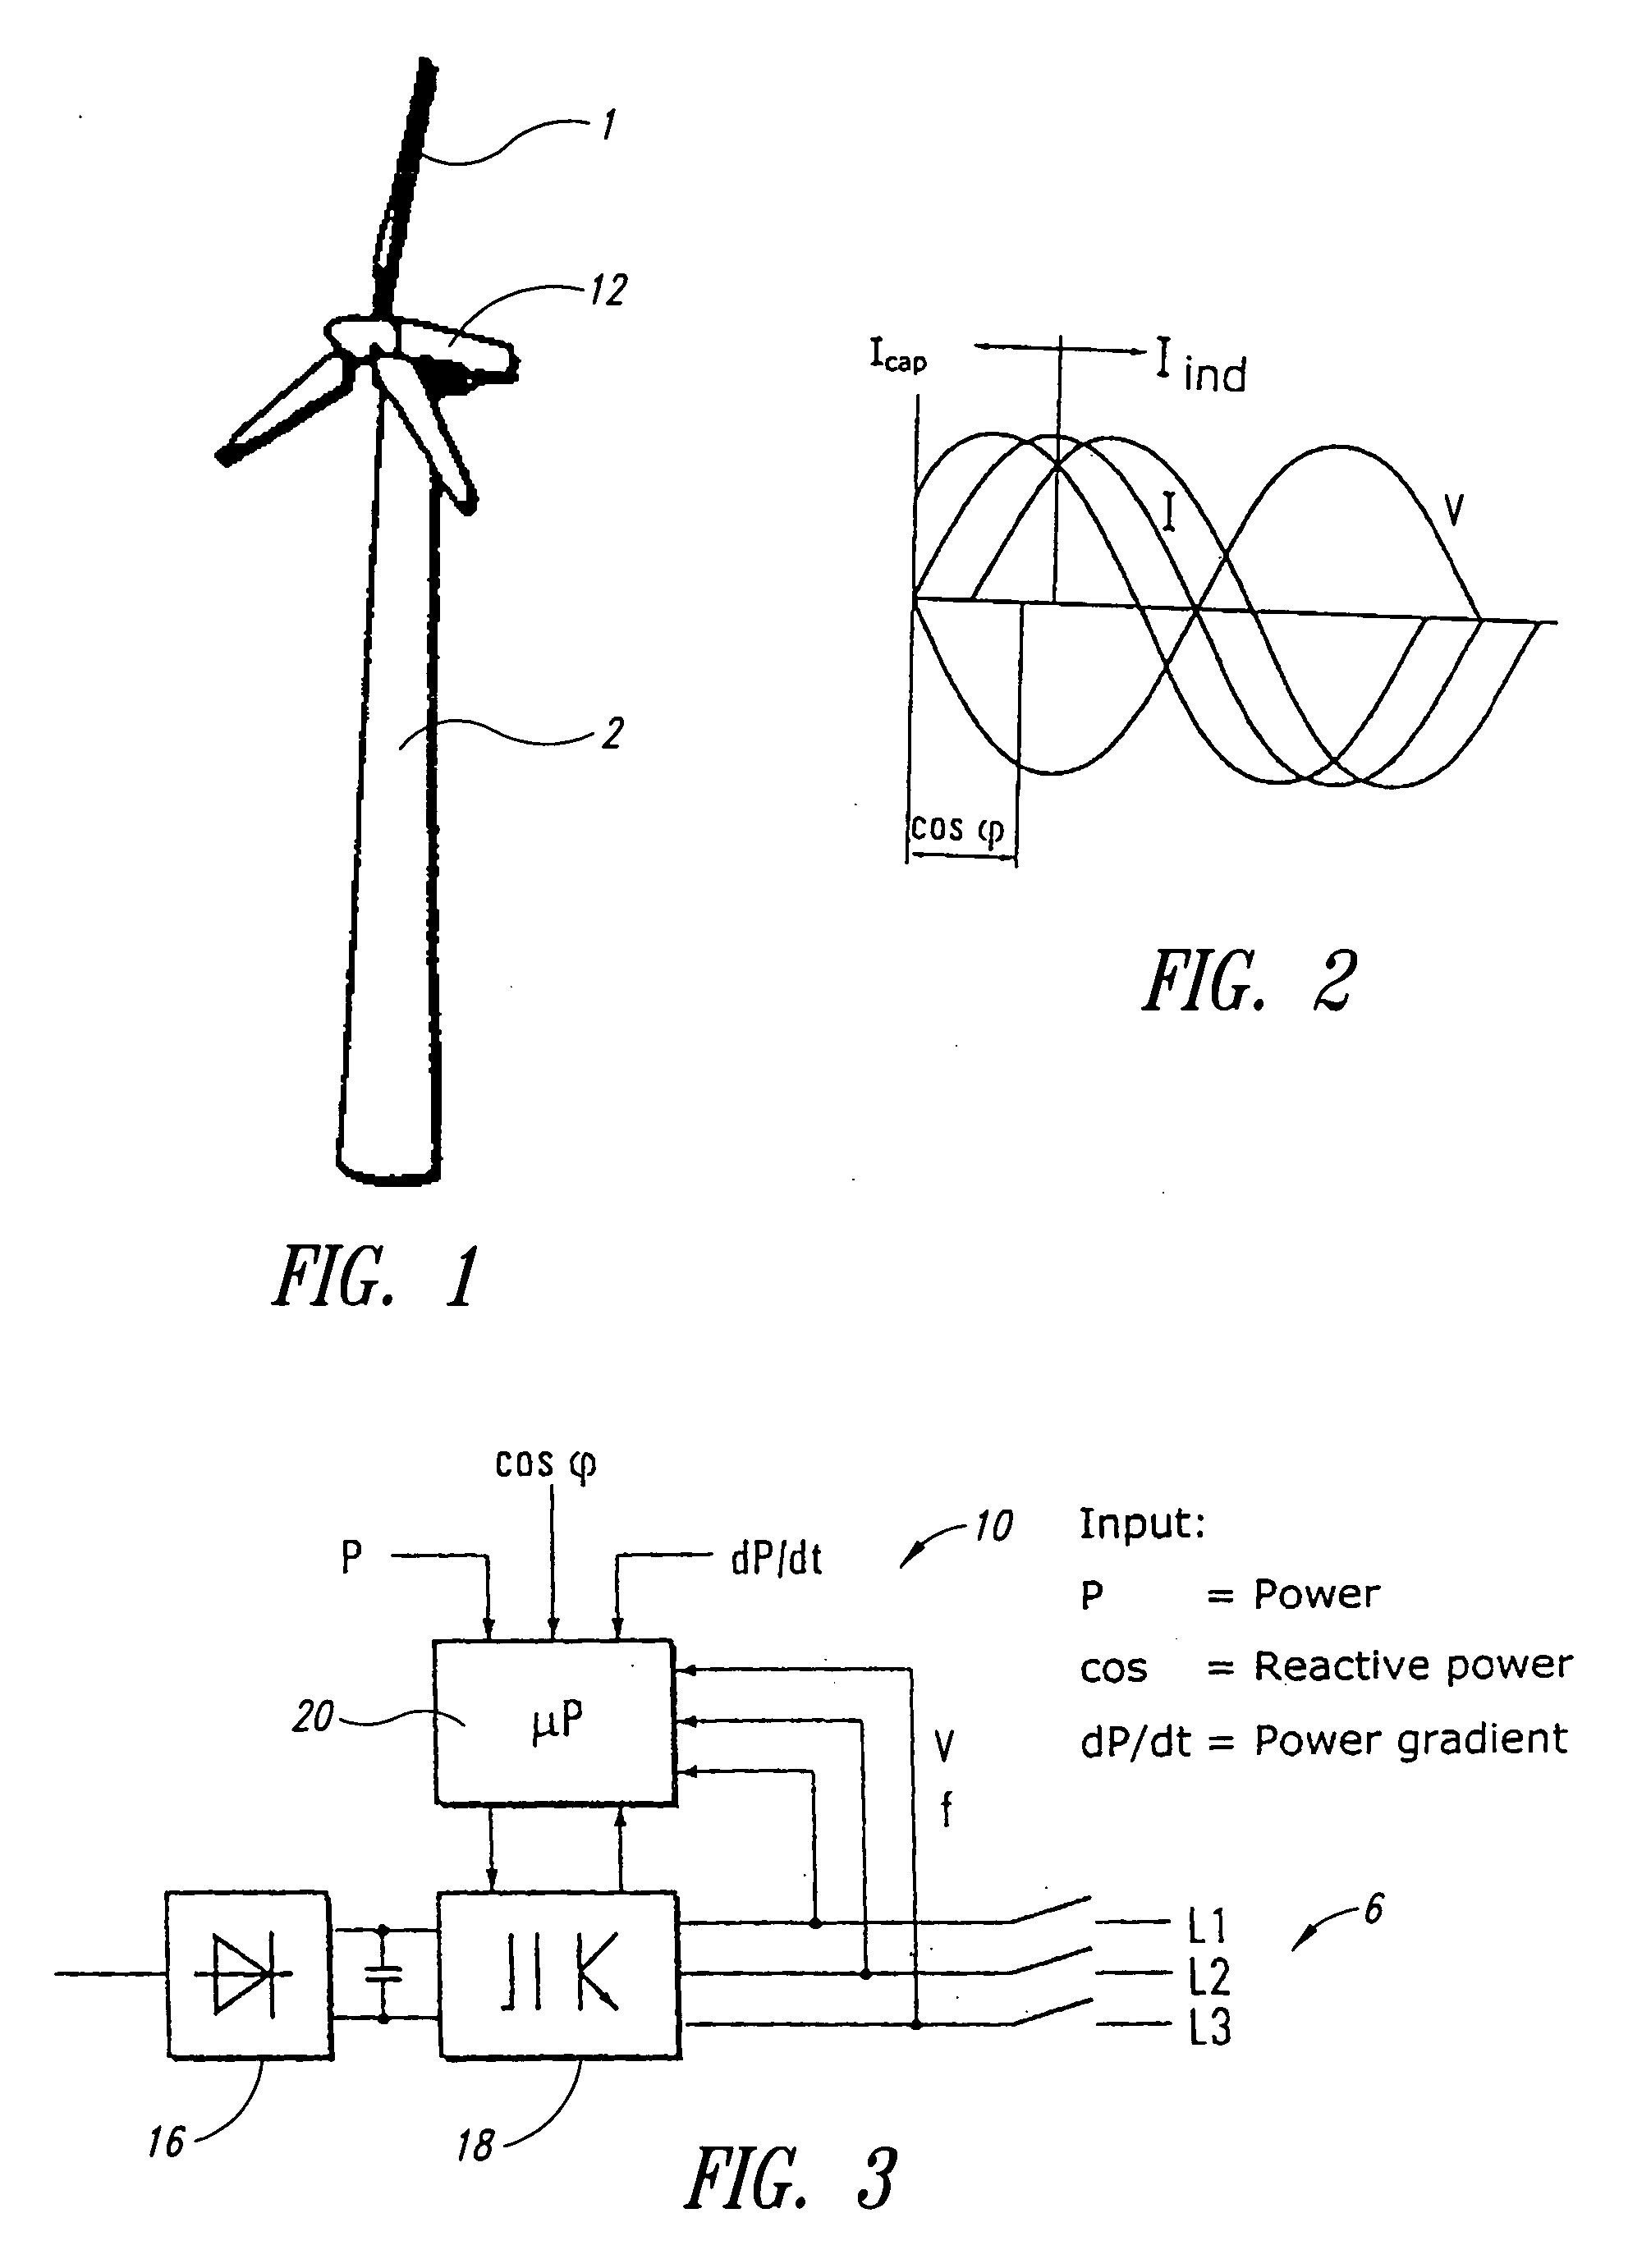 Method for operating a wind park